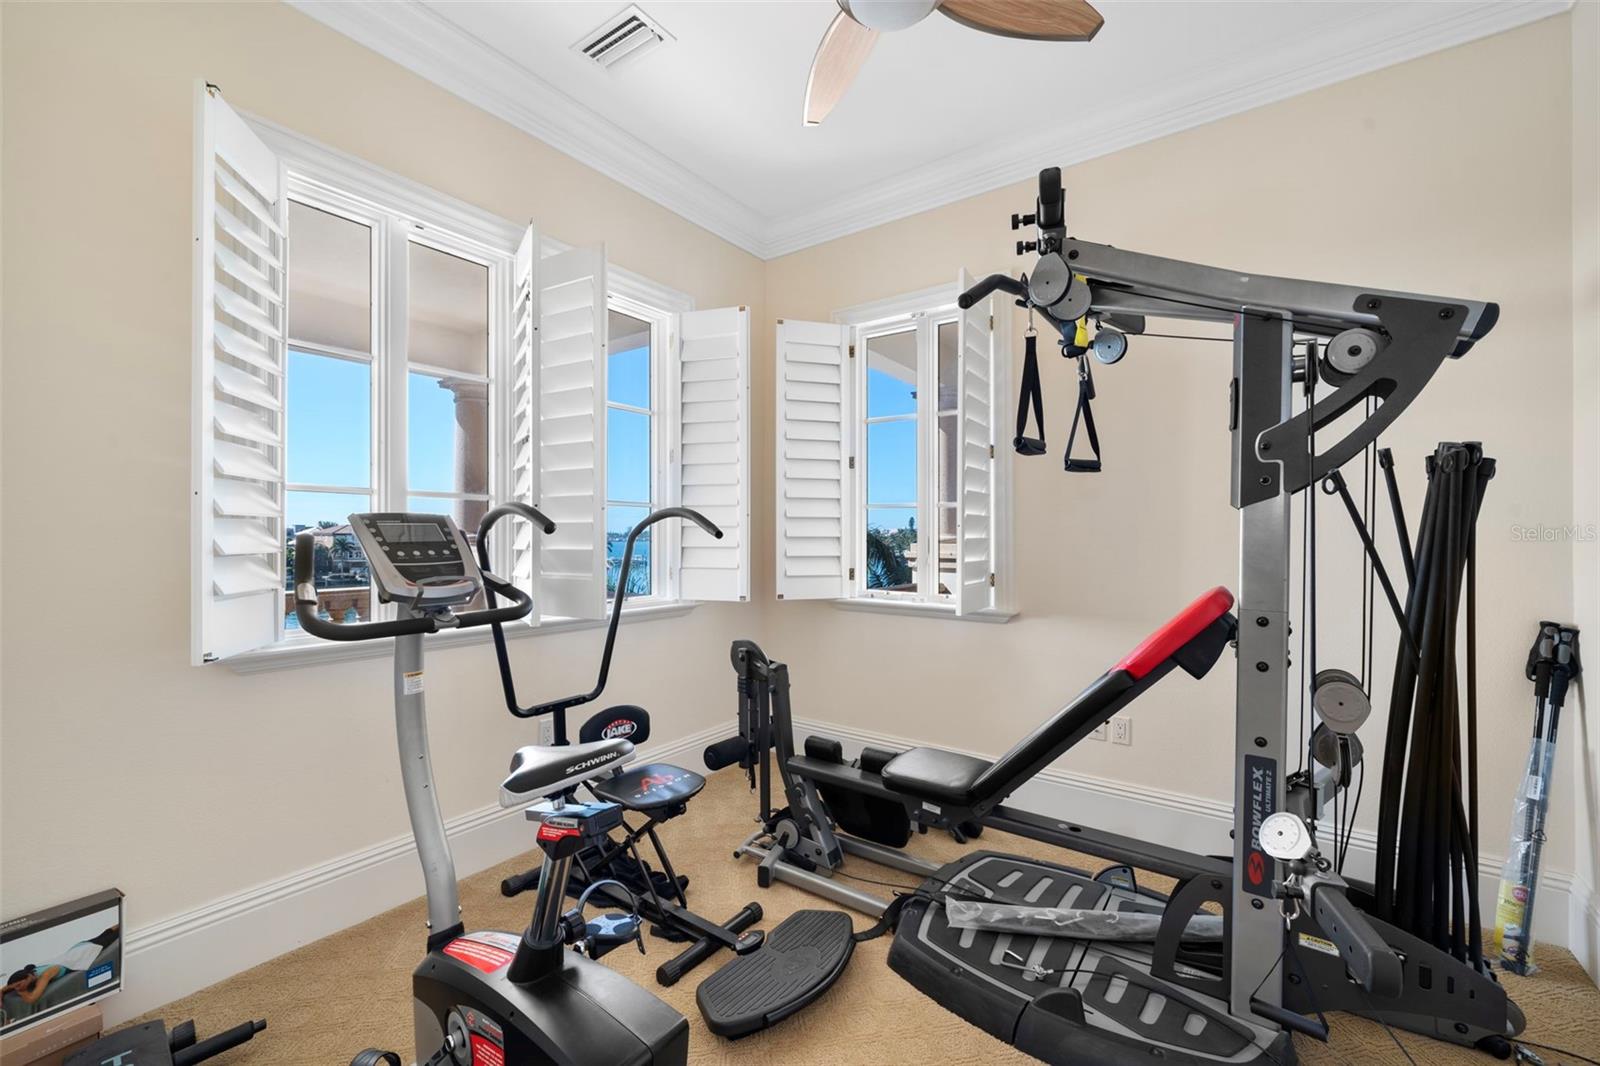 Primary suite with a gym